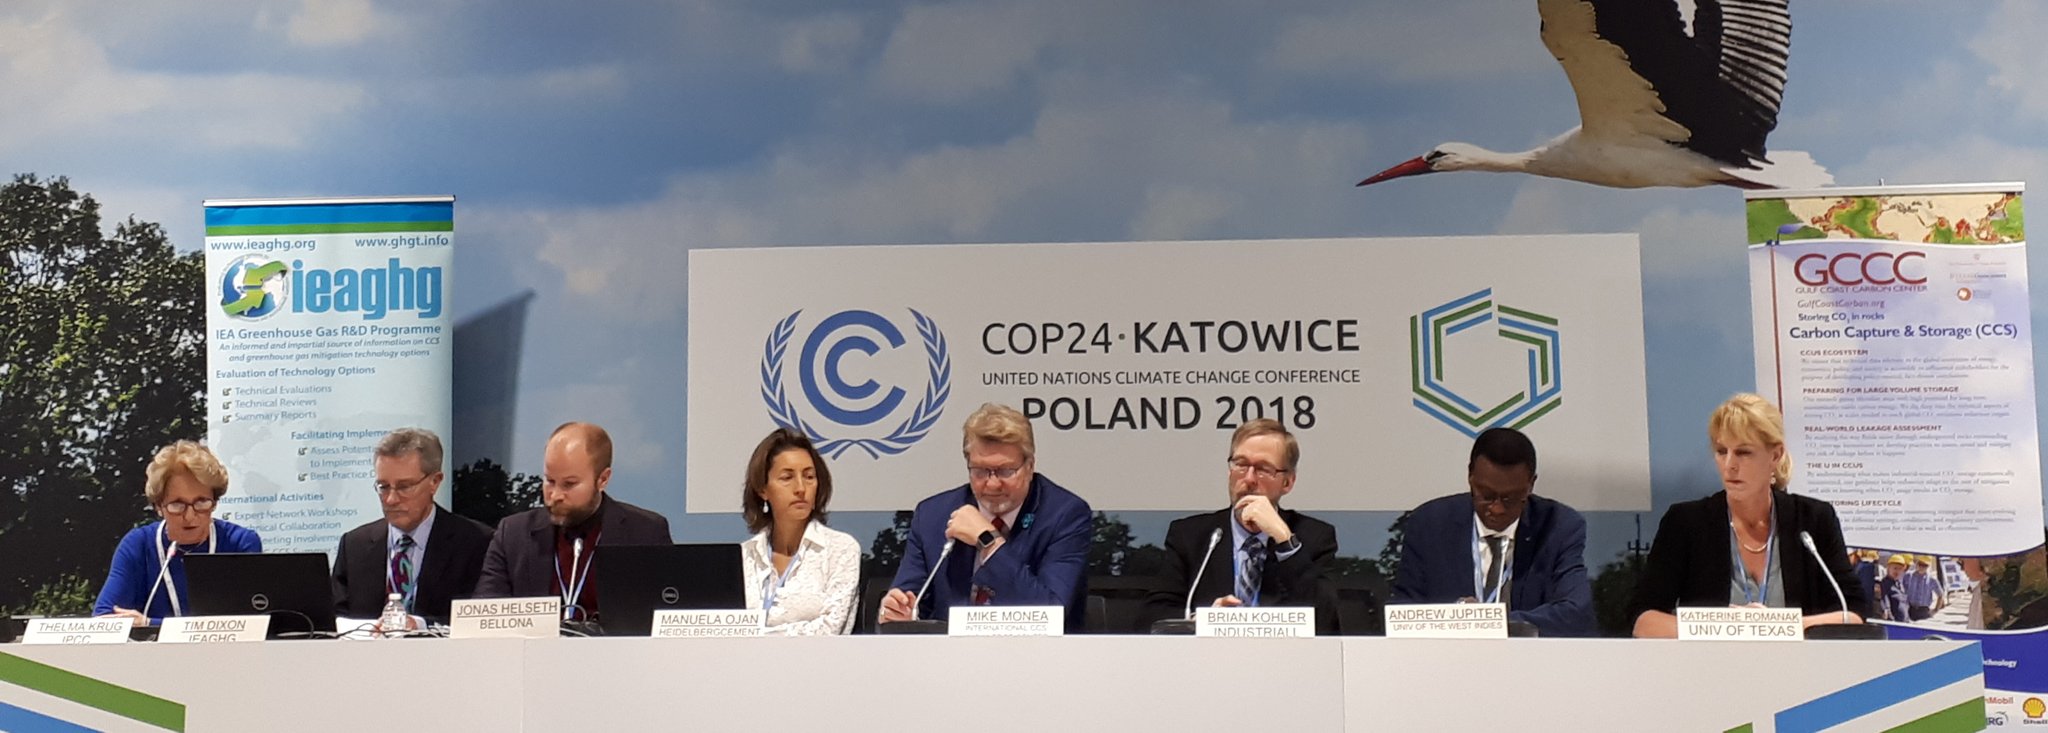 Photo of the panel at the only CCS-dedicated site event at COP24 titled "Carbon Capture and Storage (CCS) for decarbonising industry in developed and developing countries."